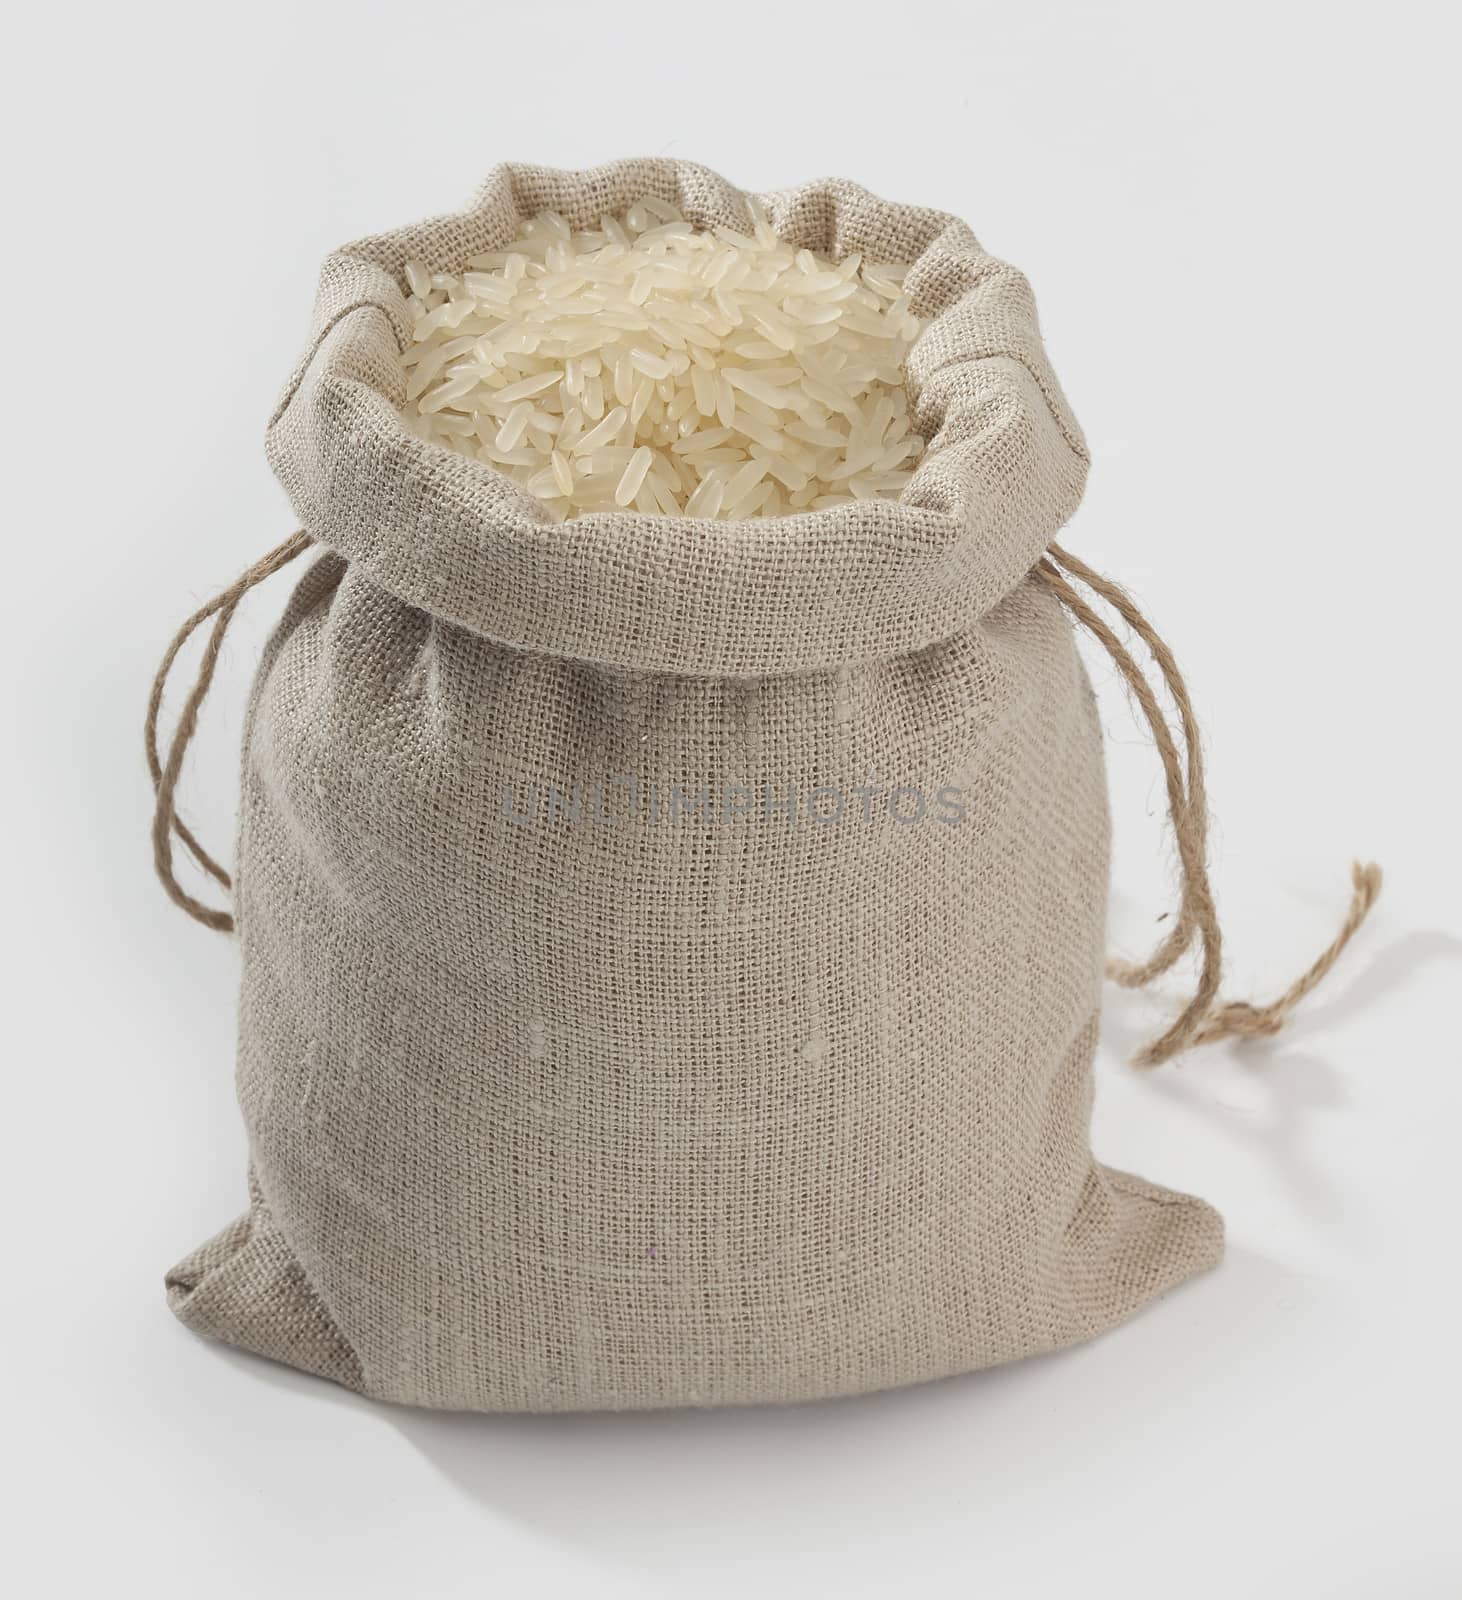 Sack with rice on the grey background